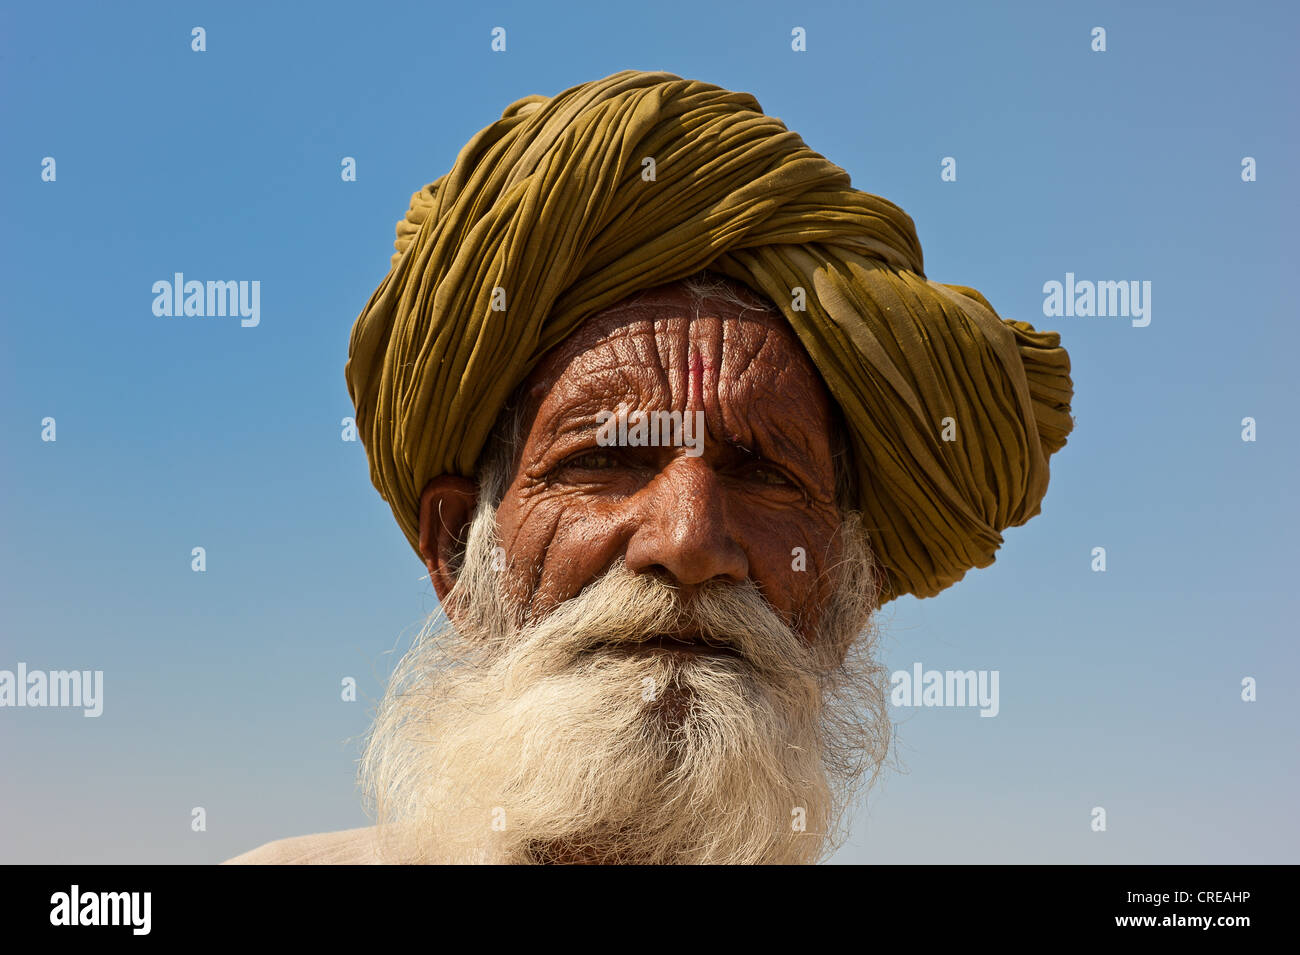 Portrait of an elderly Rajasthani, Indian man with a grey beard wearing a traditional turban Thar Desert, Rajasthan, India, Asia Stock Photo